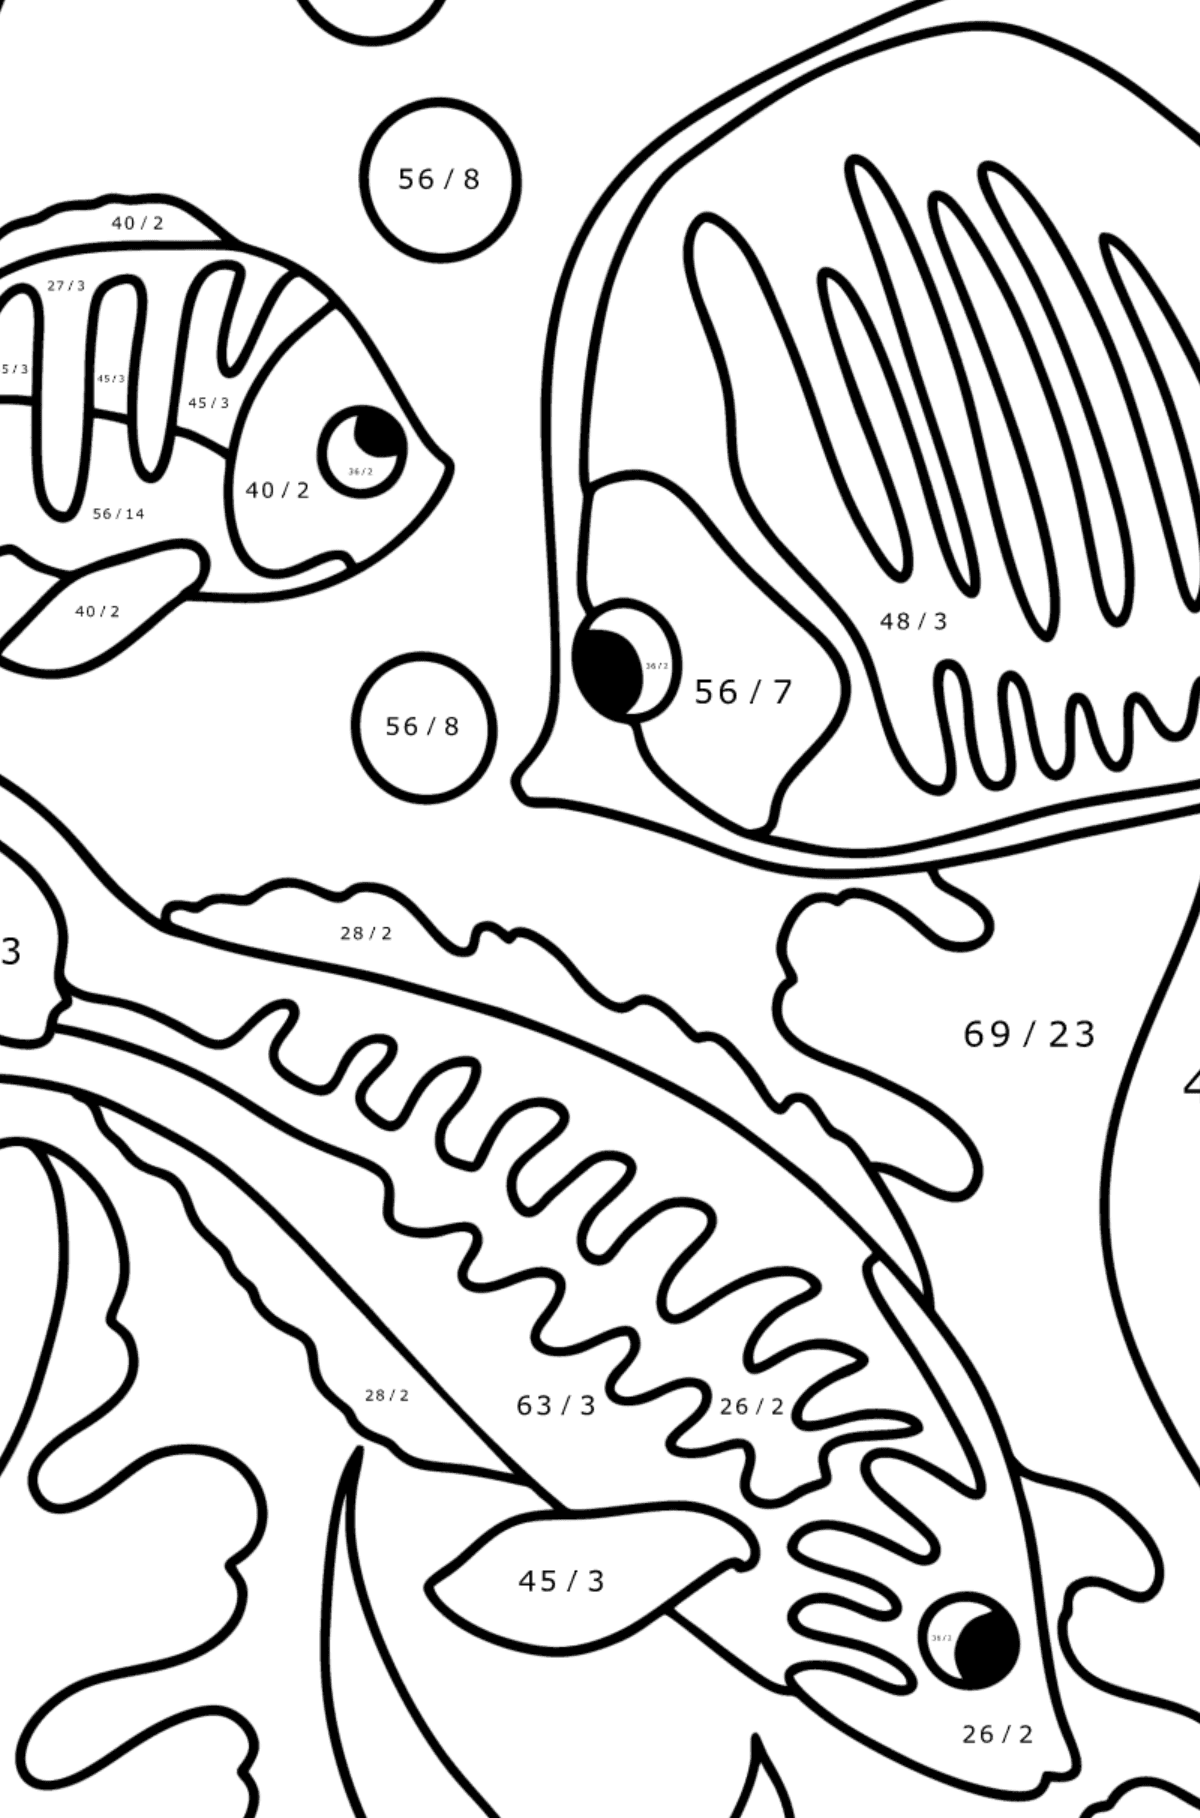 Fish in the sea coloring page - Math Coloring - Division for Kids